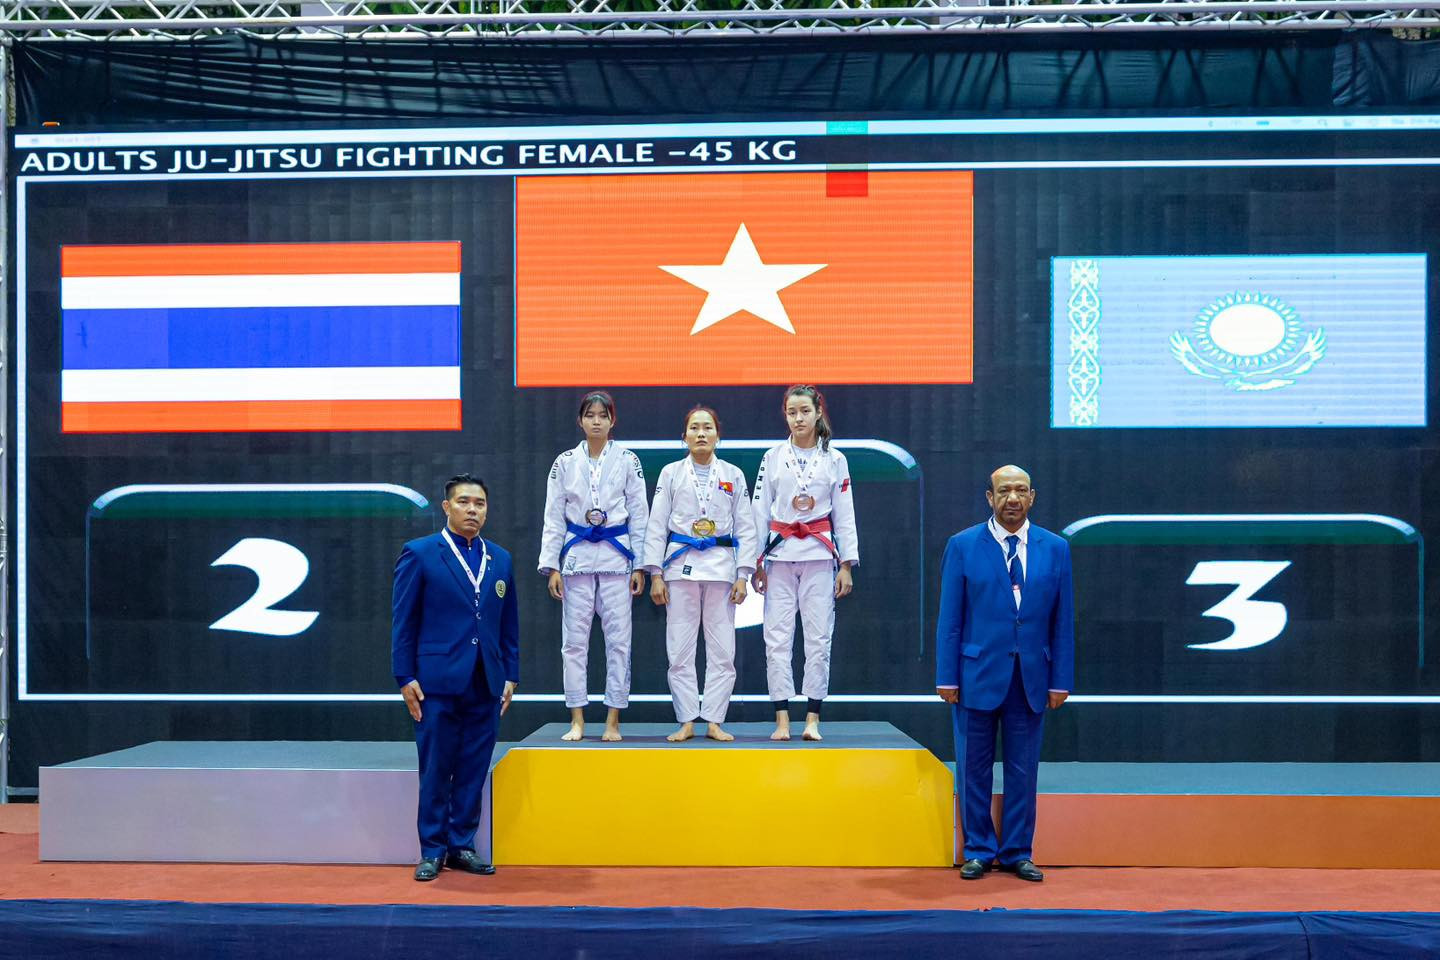 Vietnam's two triumphs see them third in the medals table, with Phung Thi Hue, centre, winning the first gold of the day in the women's under-45kg division ©JJAU